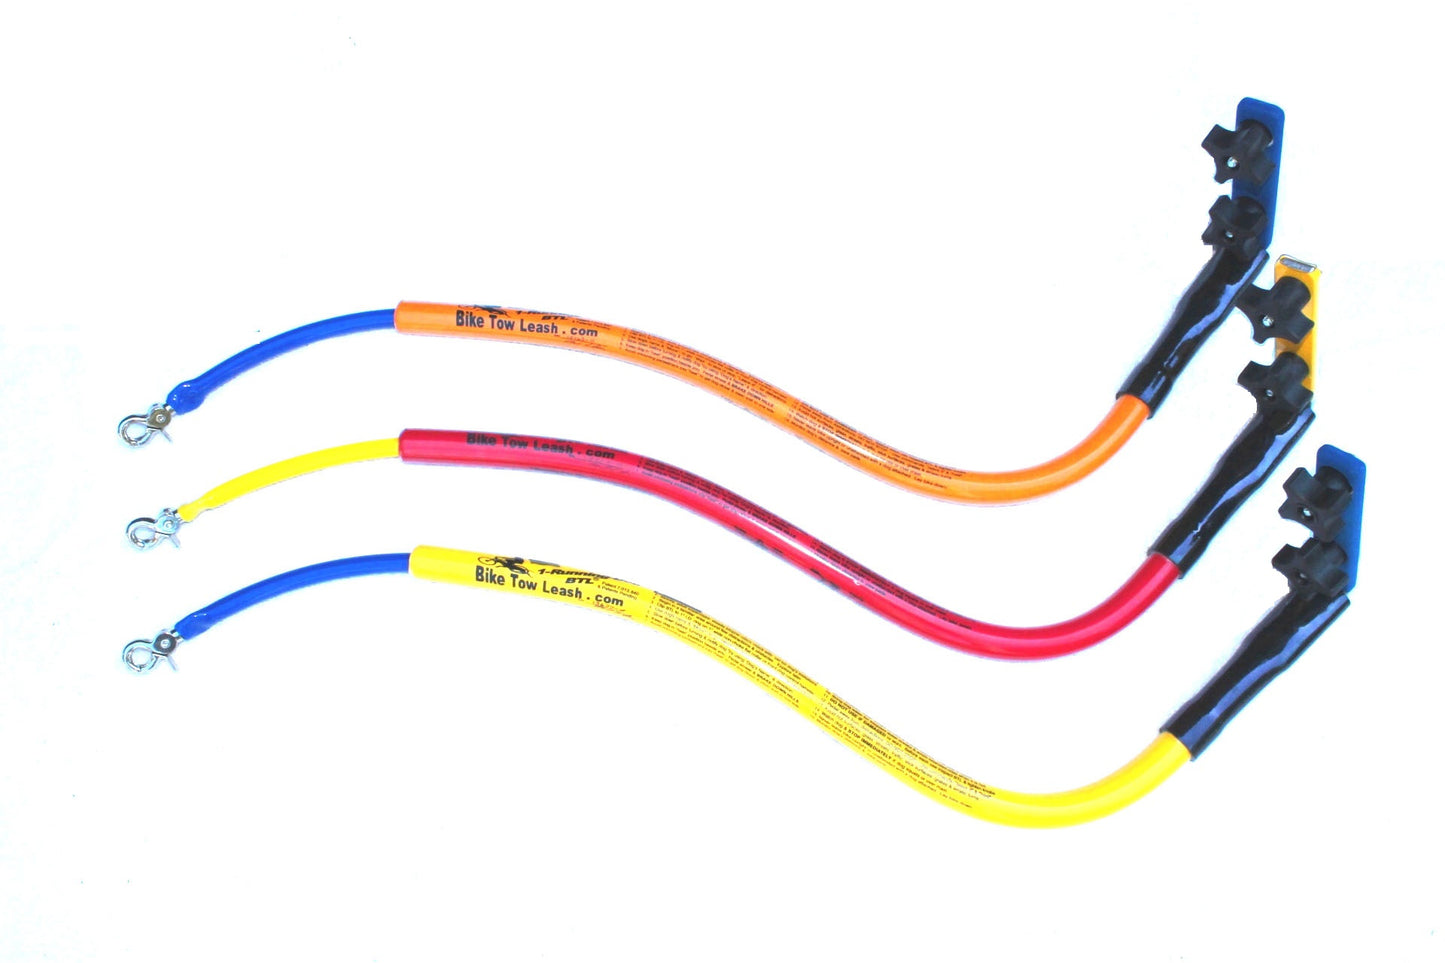 3 Bike Tow Leash® in 3 colors orange, red, and yellow on a white background